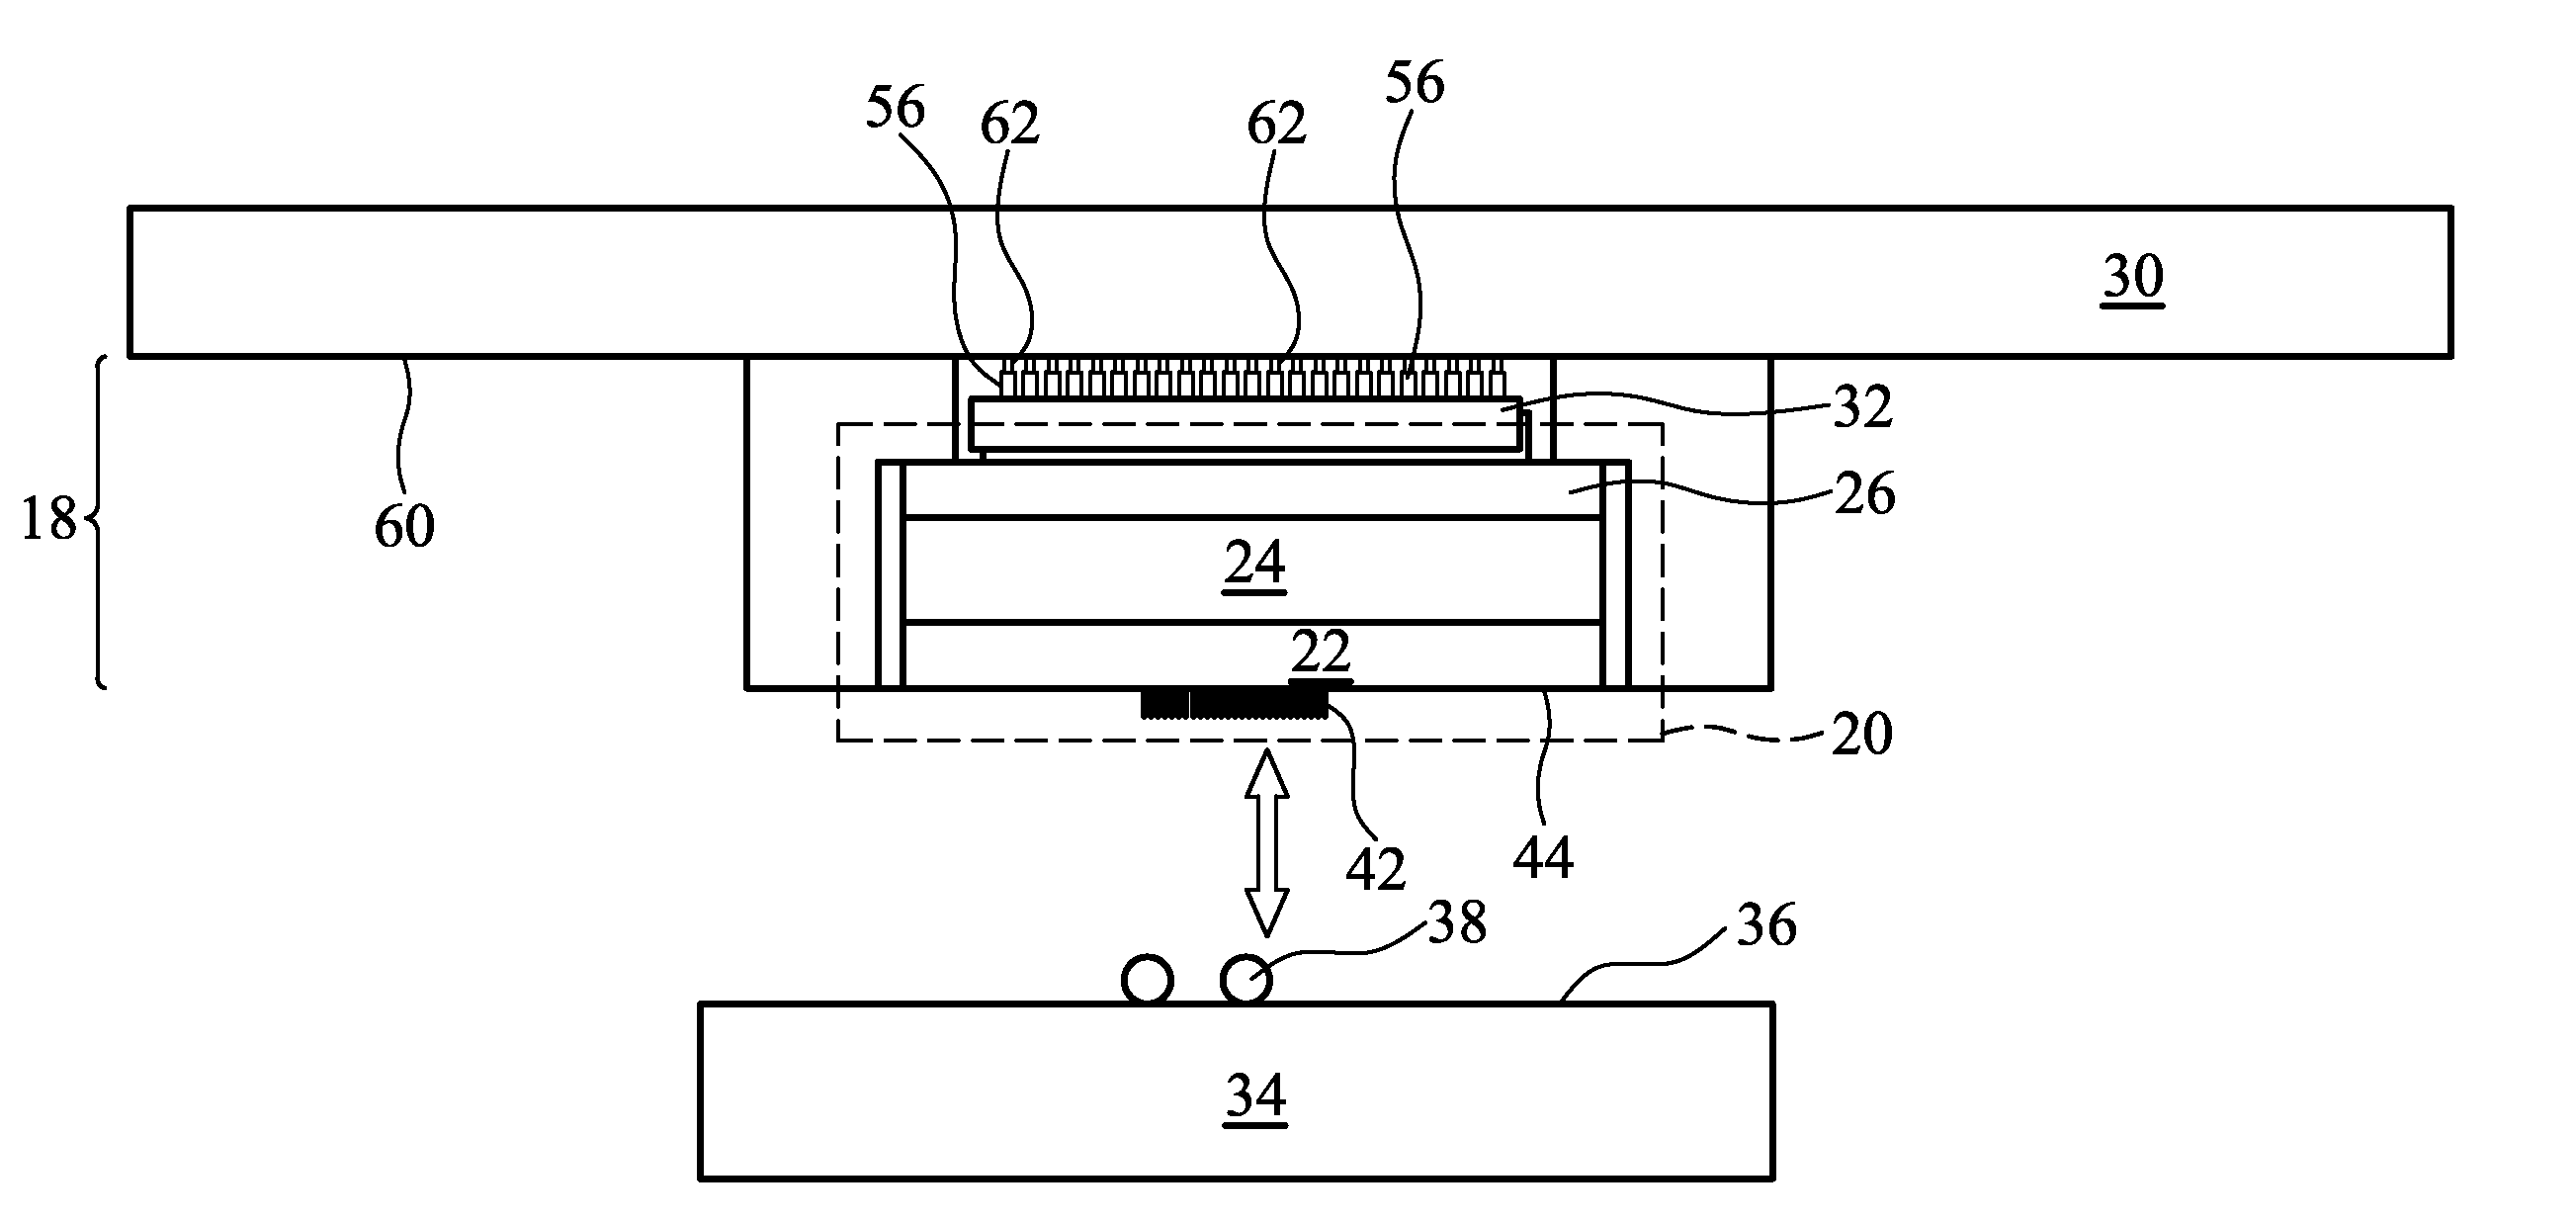 Universal array type probe card design for semiconductor device testing